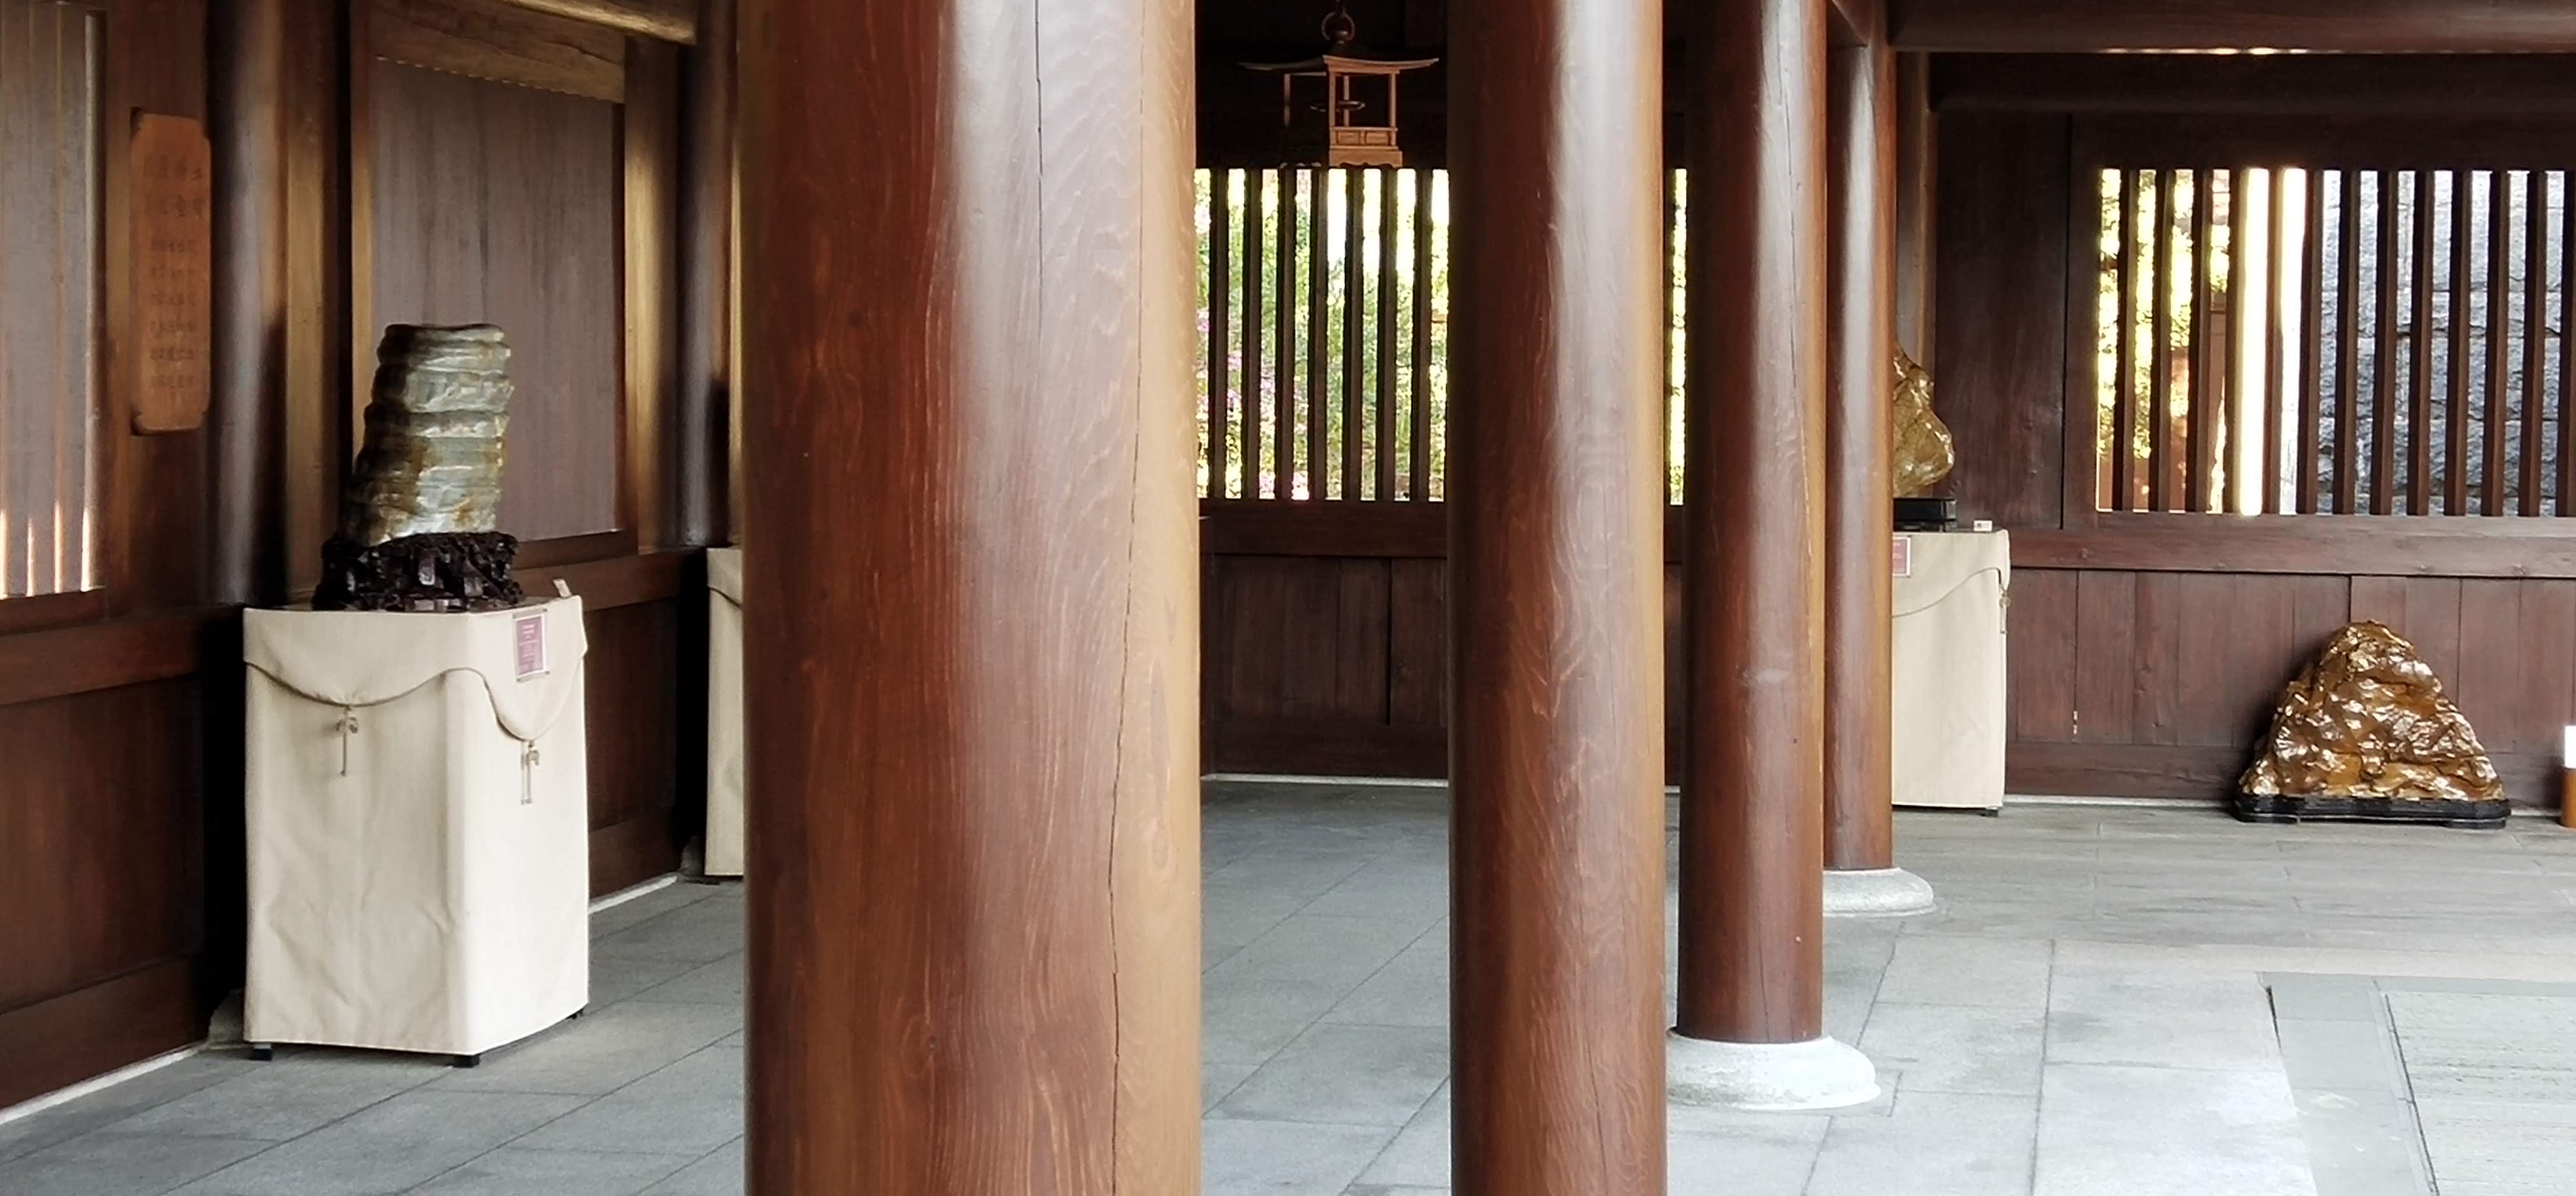 Wooden columns in Chi Lin Nunnery